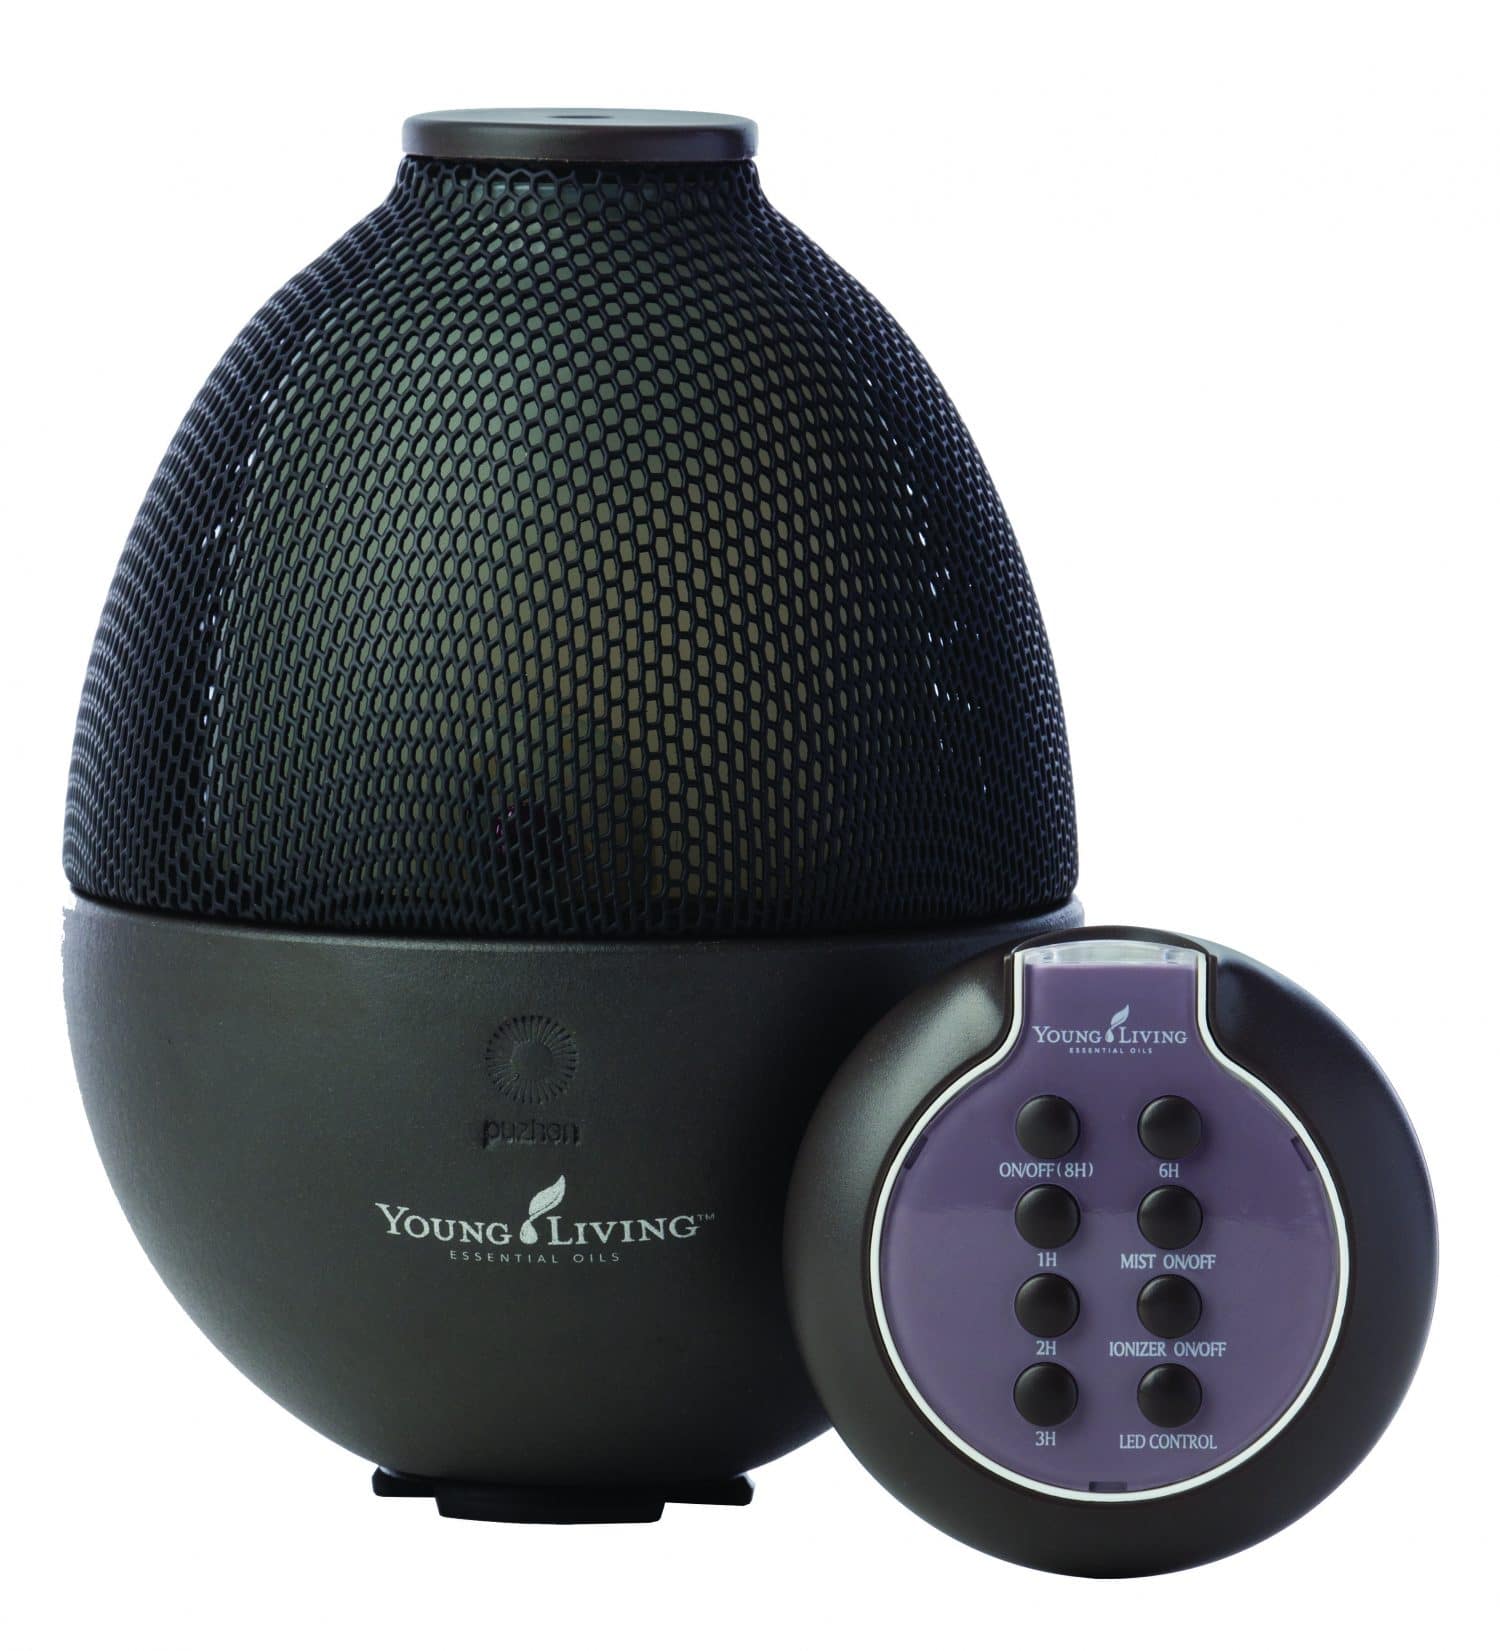 Young Living Dewdrop™ diffuser